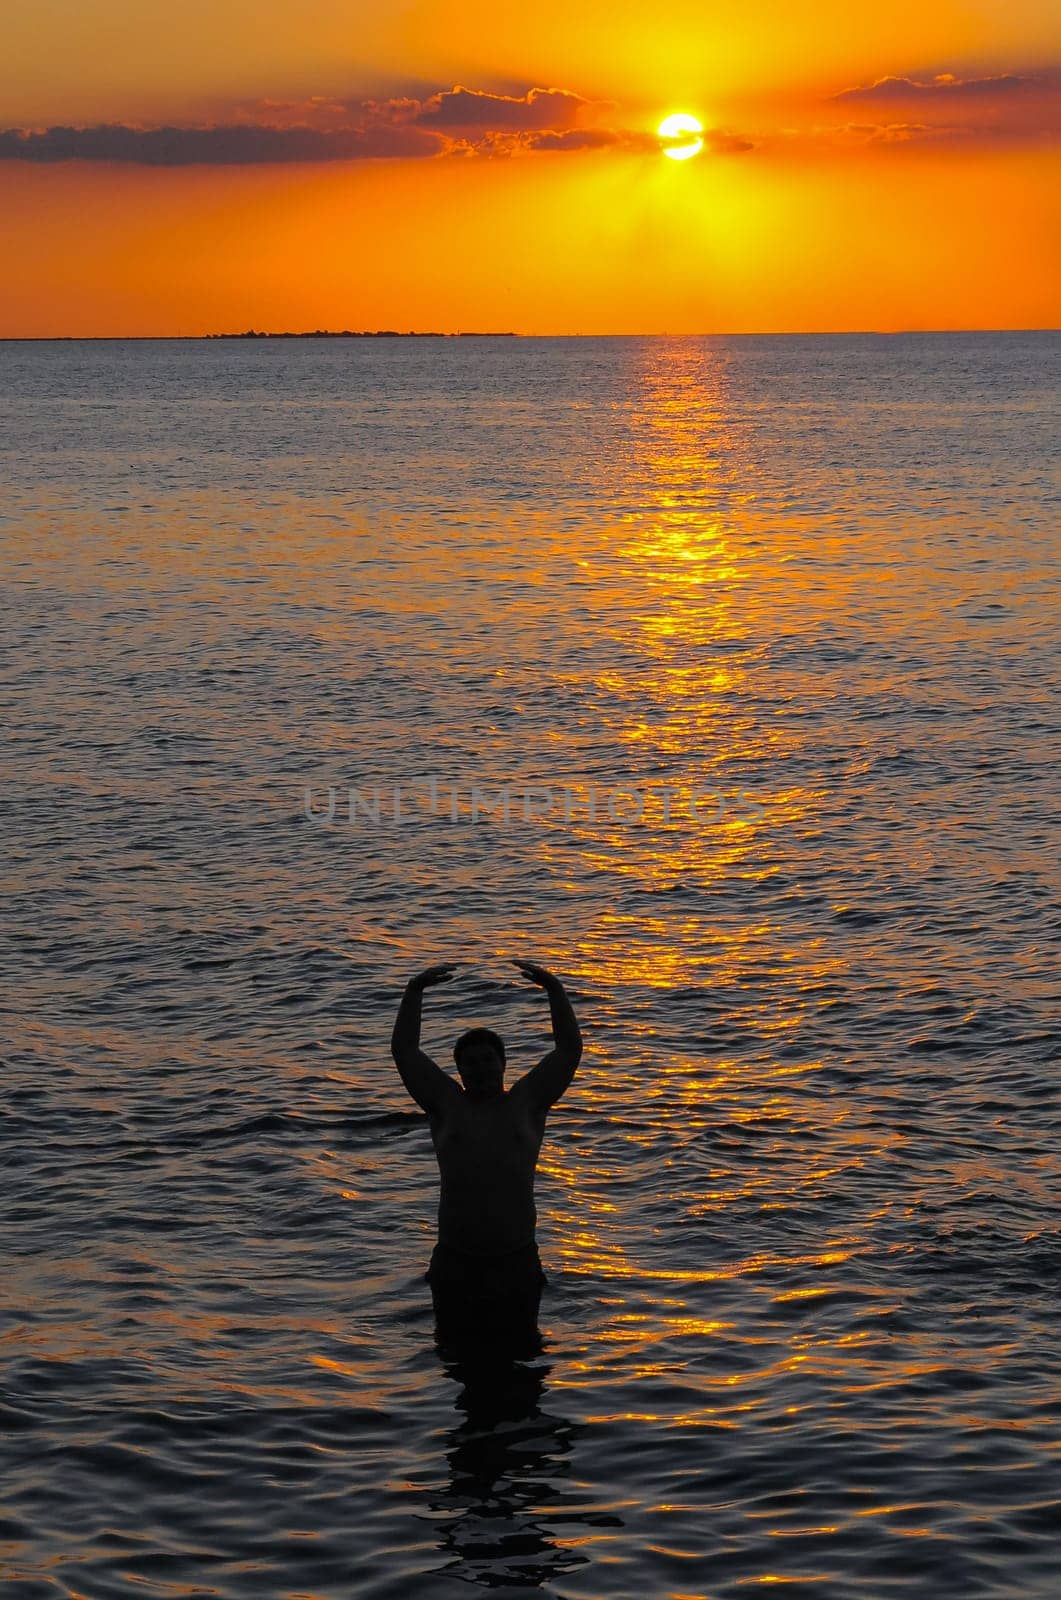 Human silhouette against the background of the sunrise over the Black Sea in the Eastern Crimea by Hydrobiolog